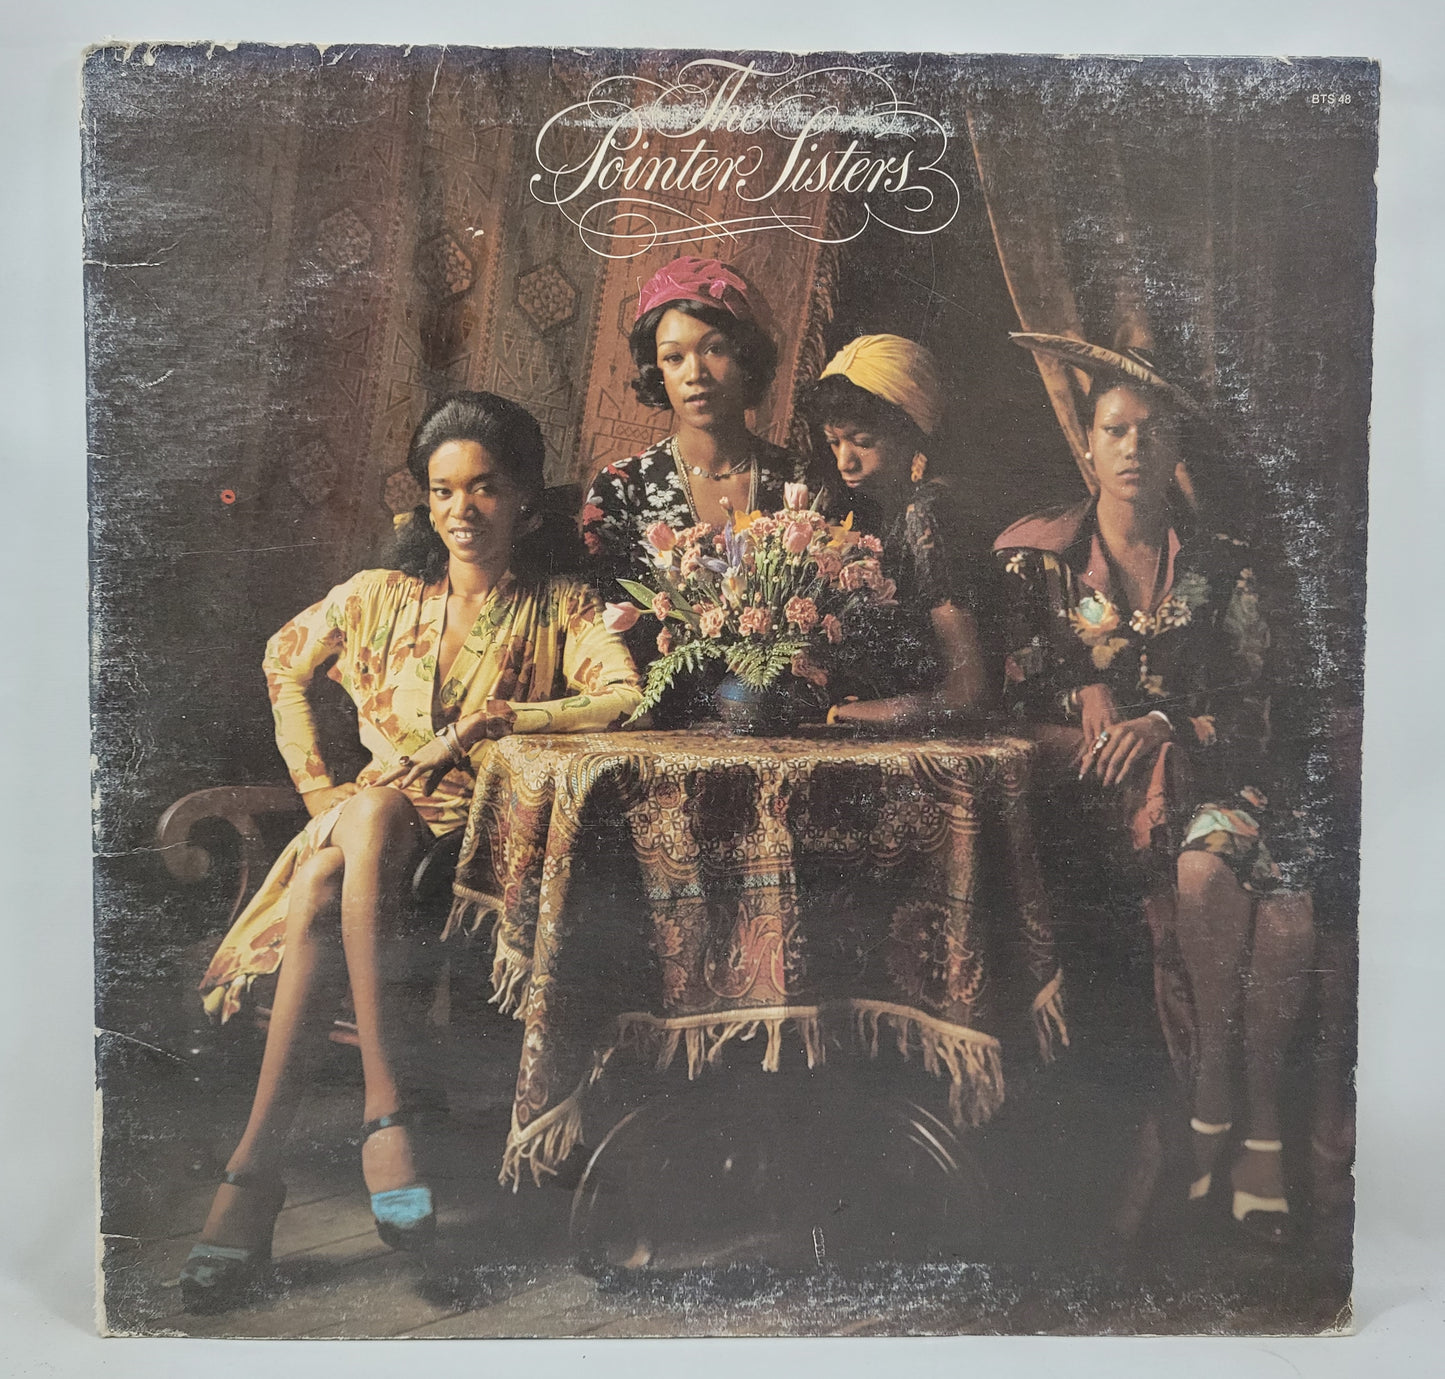 The Pointer Sisters - The Pointer Sisters [1973 Used Vinyl Record LP]